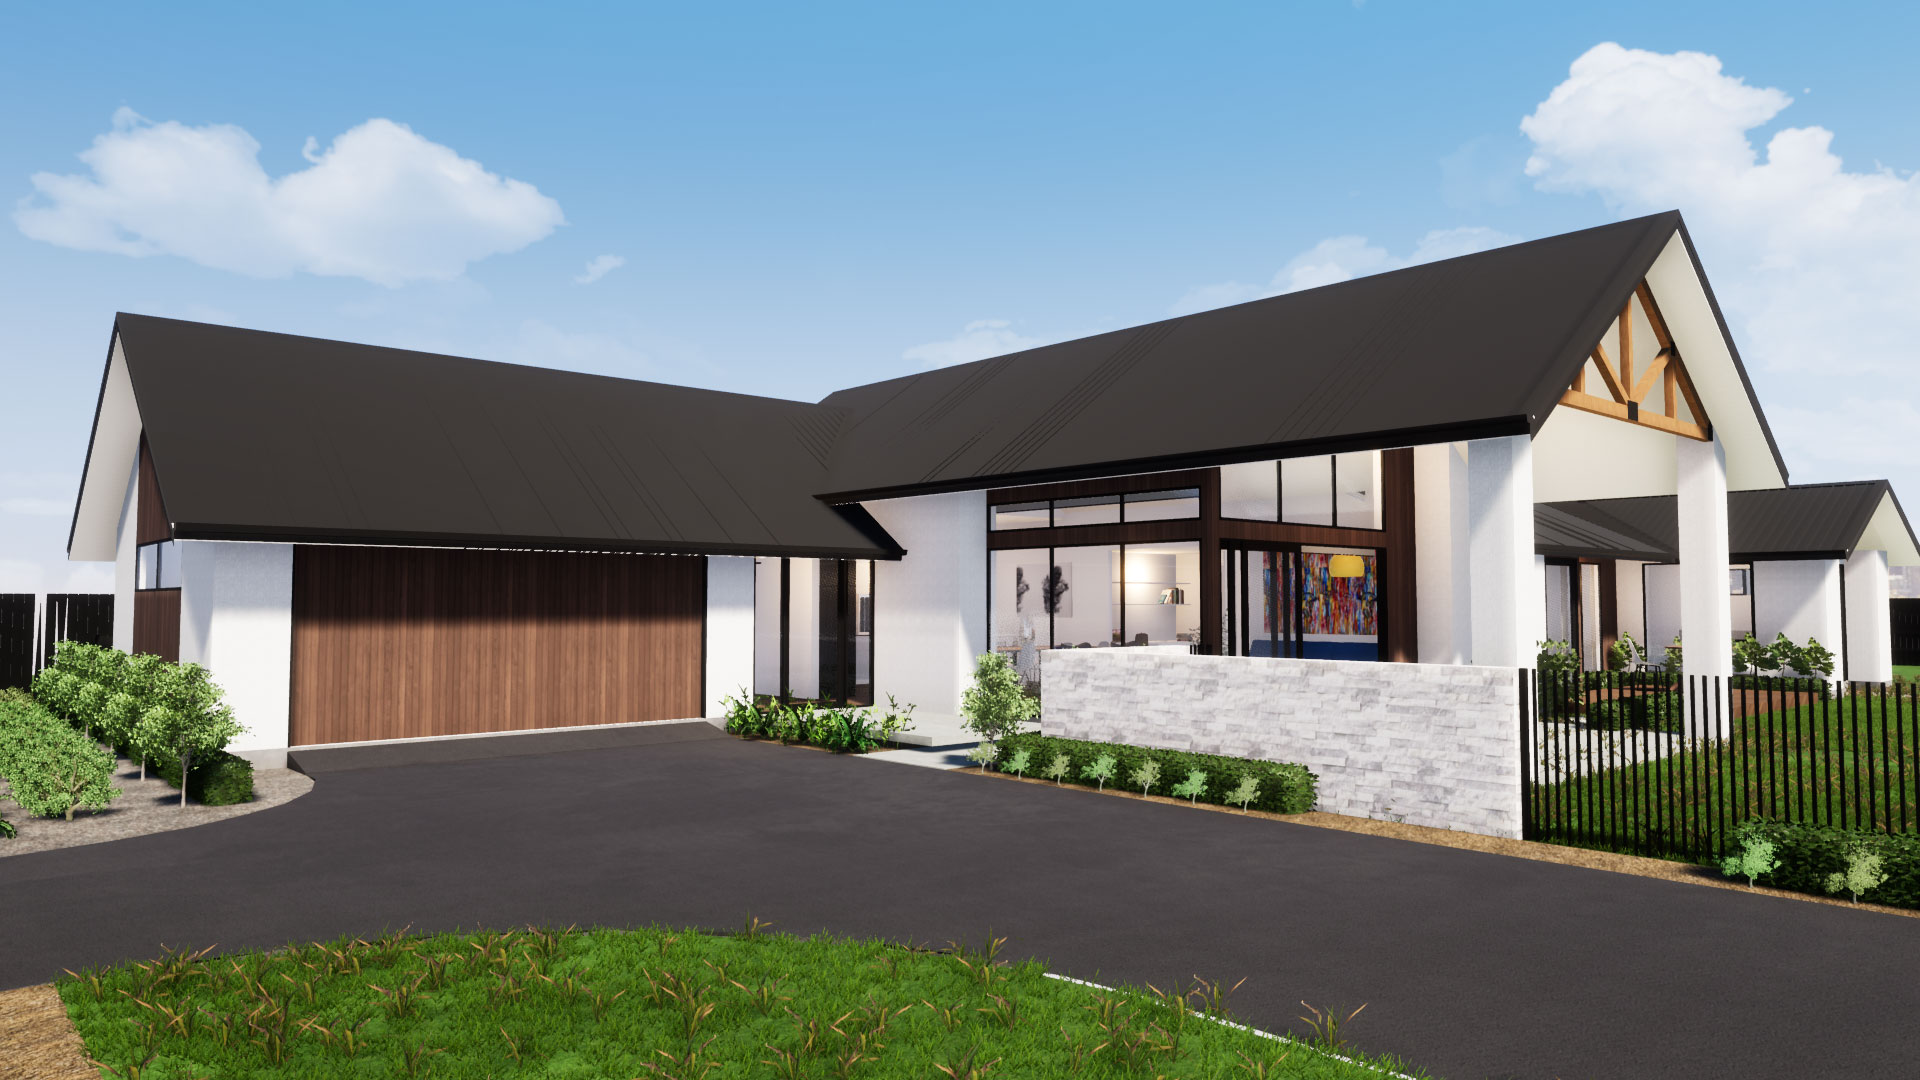 Open plan living, 4 bedrooms, master suite with ensuite, separate amenities & two roof styles to choose from with the Dale Thorpe House Floor plan.